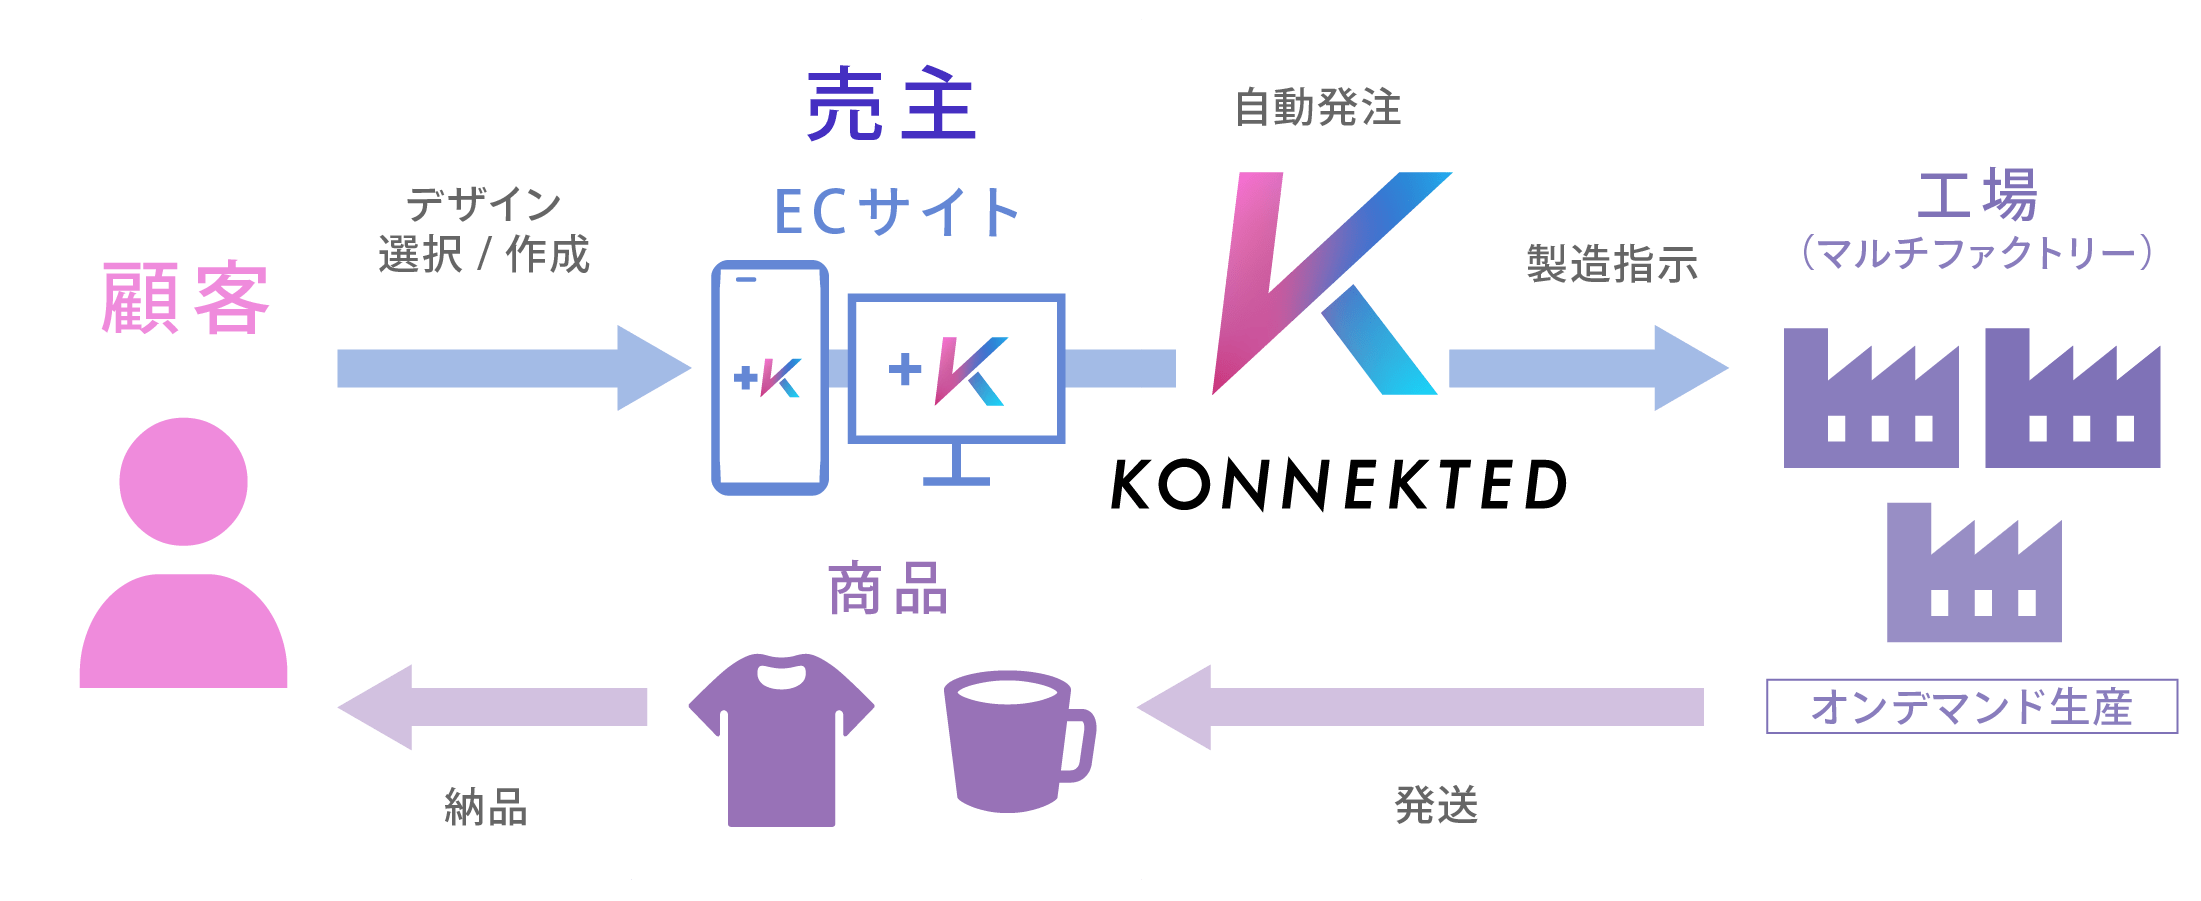 About KONNEKTED